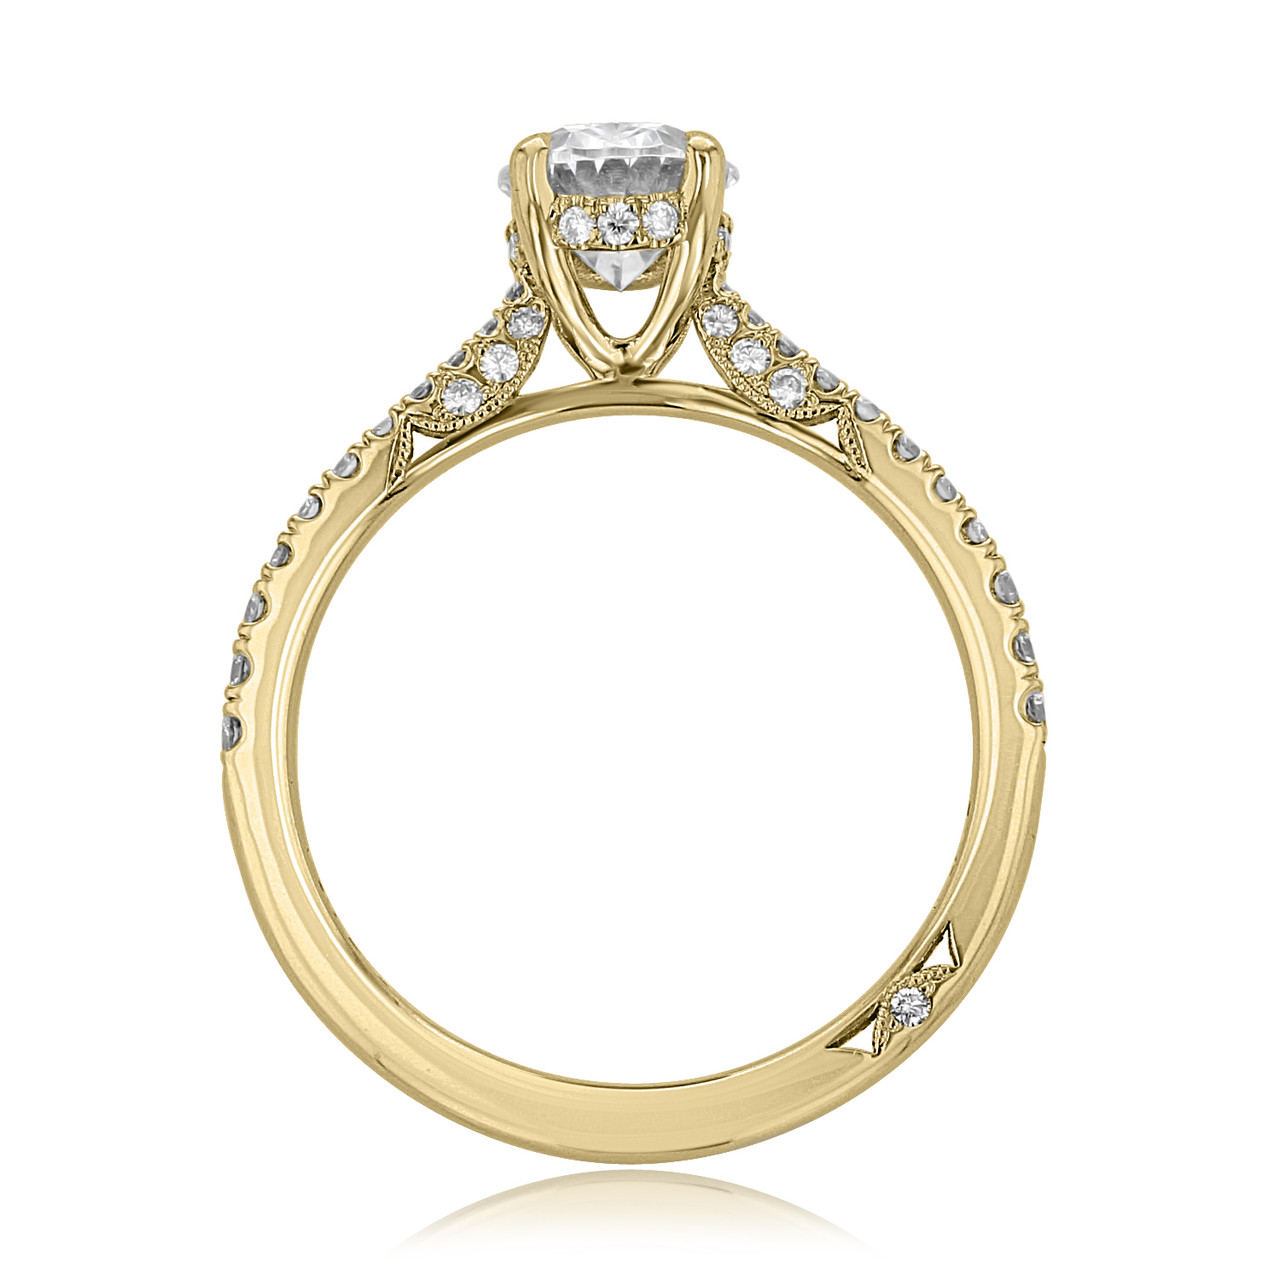 Engagement Rings - Yellow Gold